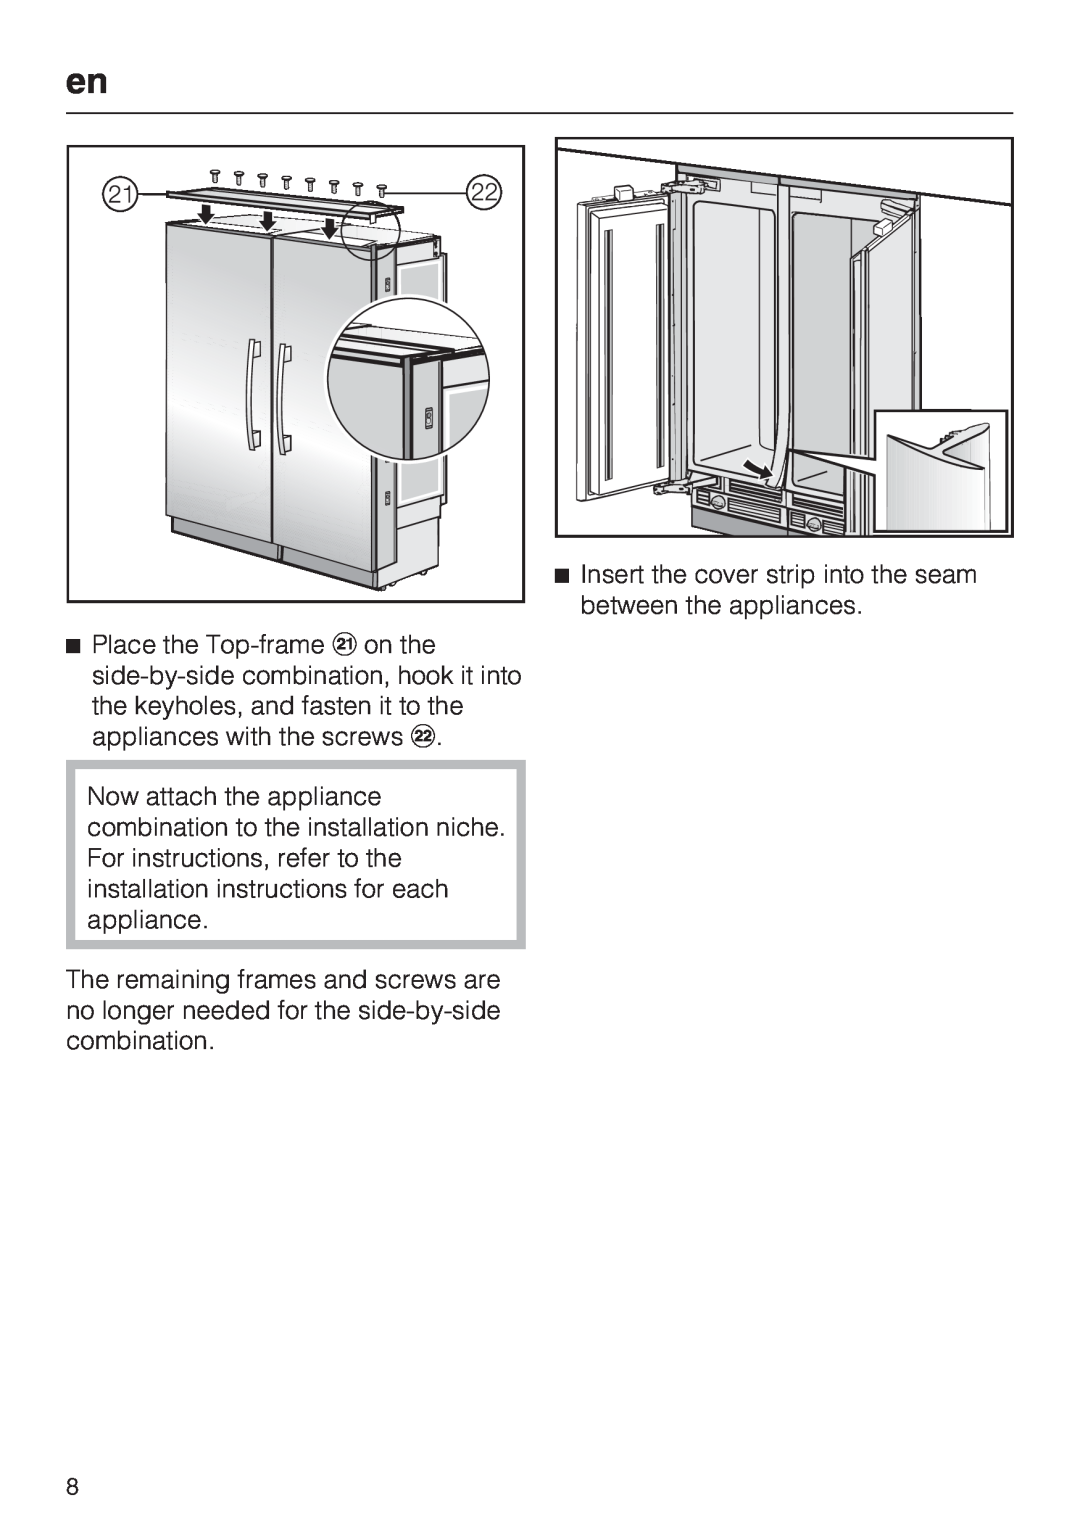 Miele 07 343 771 installation instructions Insert the cover strip into the seam between the appliances 